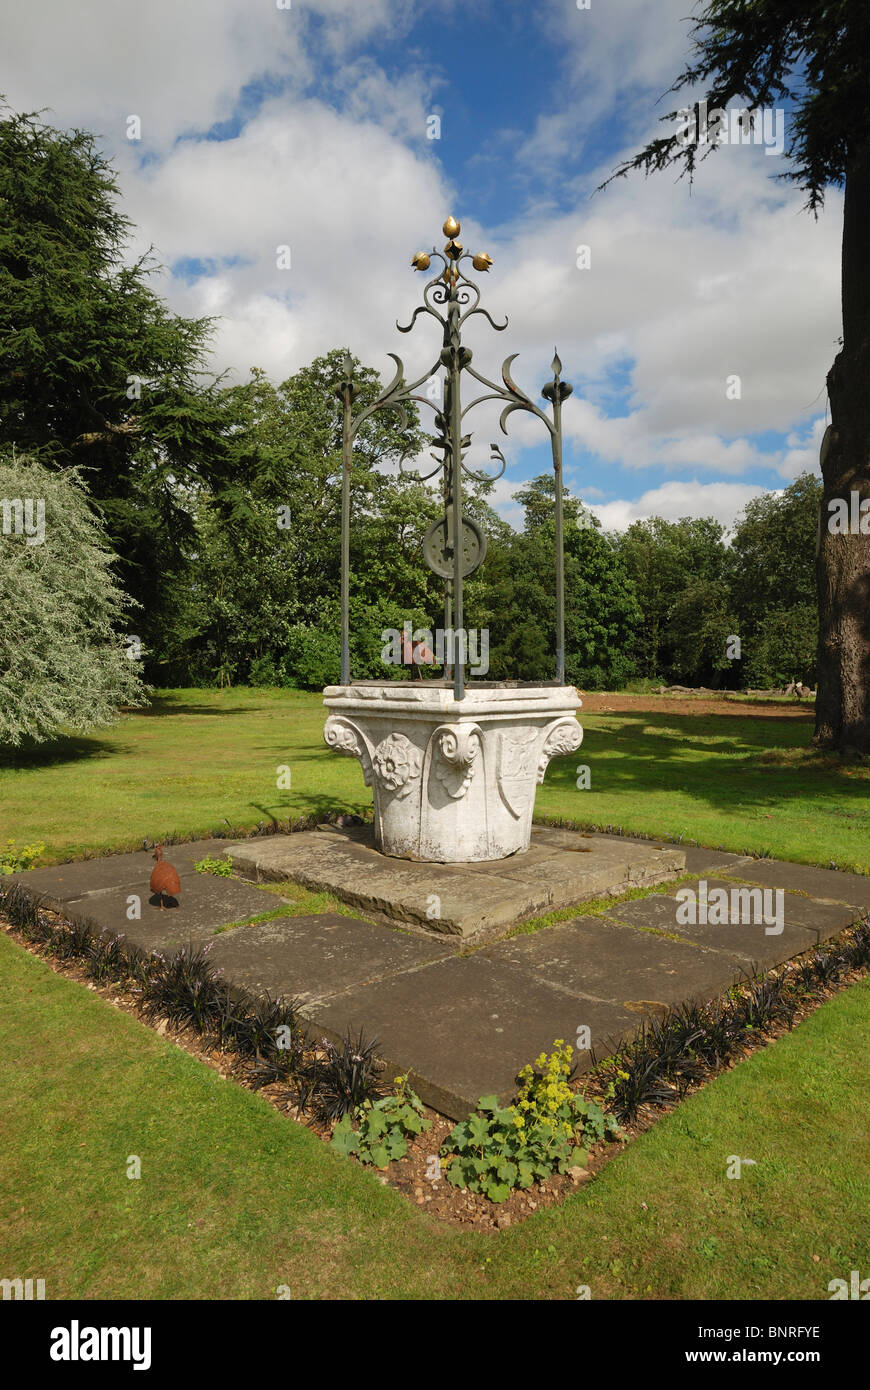 An Italian well-head used as an ornament in the grounds of Fulbeck Hall, Lincolnshire, England. Stock Photo